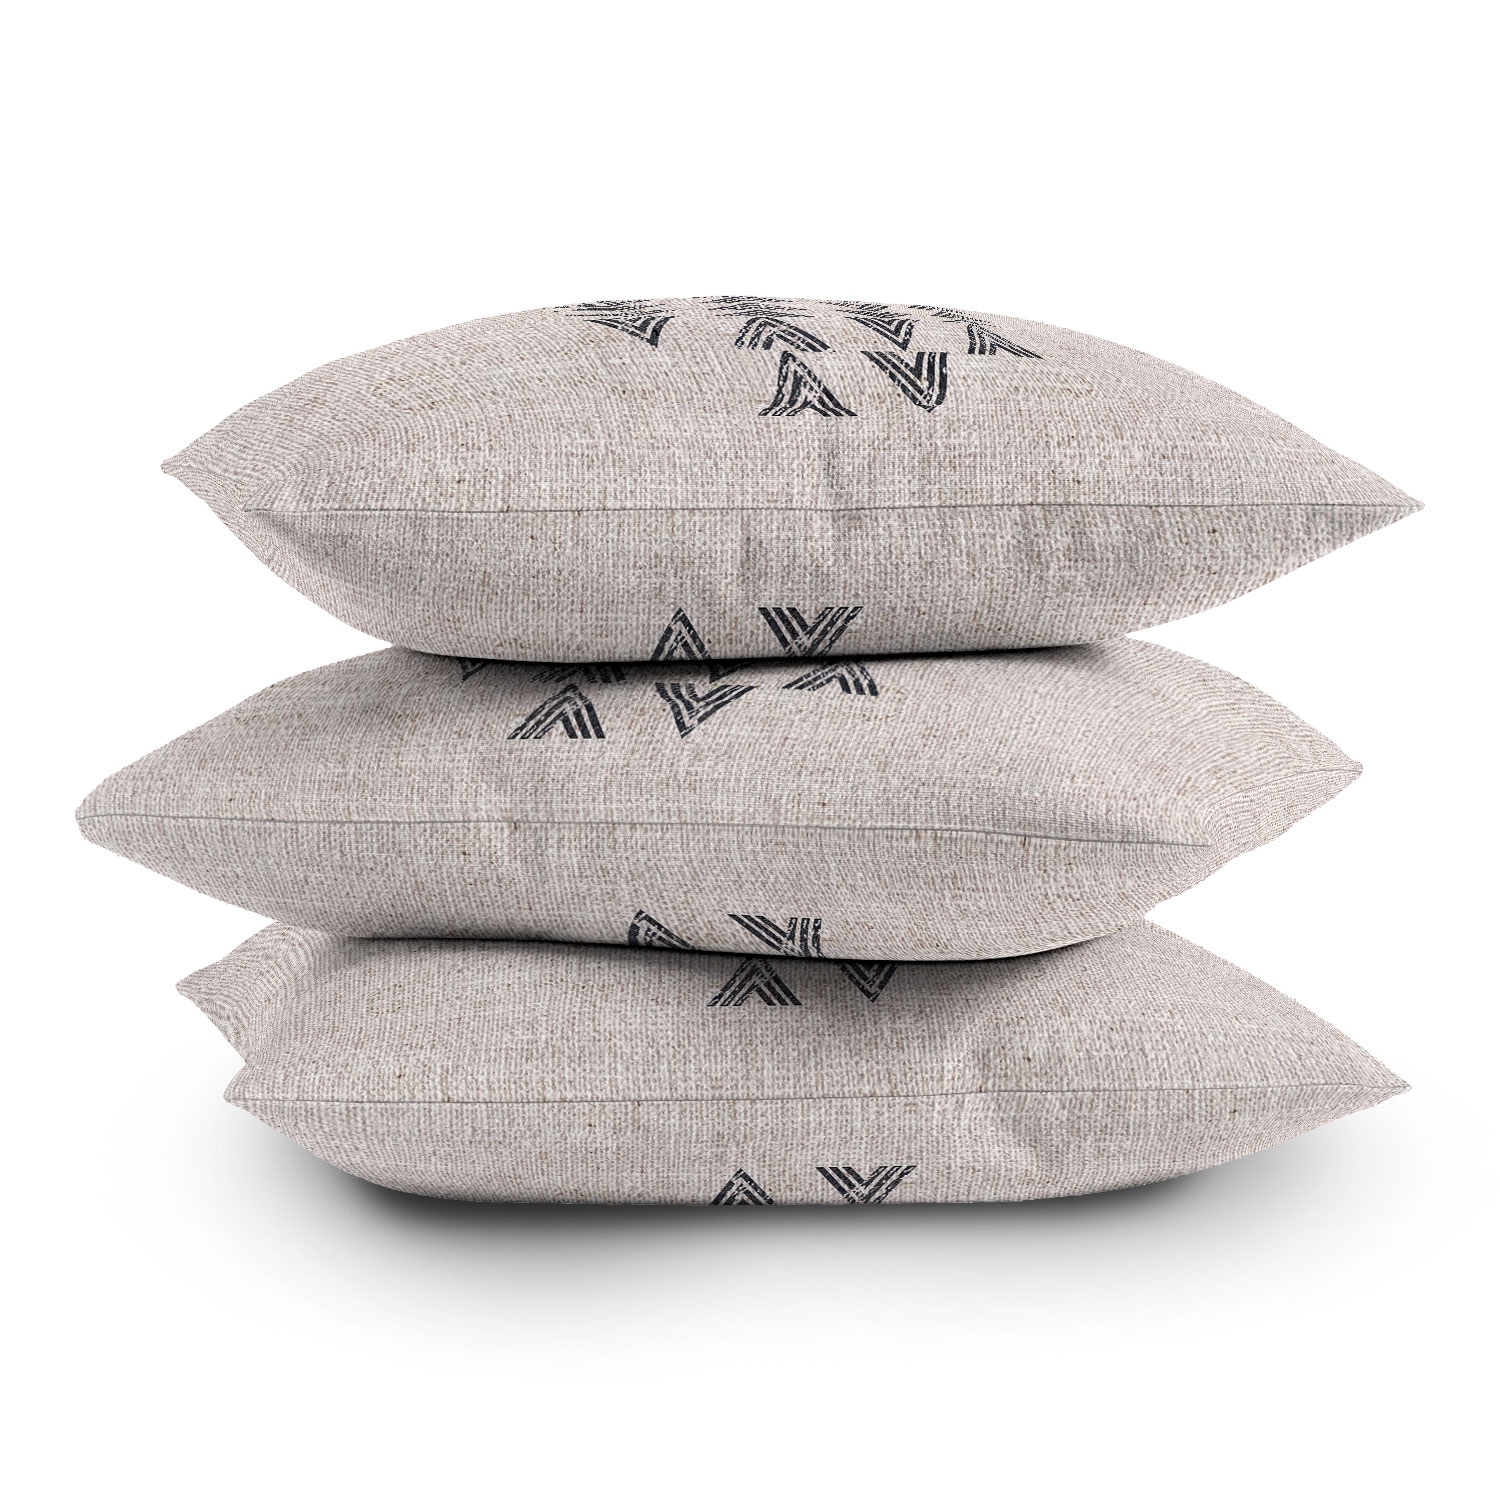 French Linen Tri Arrow by Holli Zollinger - Outdoor Throw Pillow 26" x 26" - Image 3